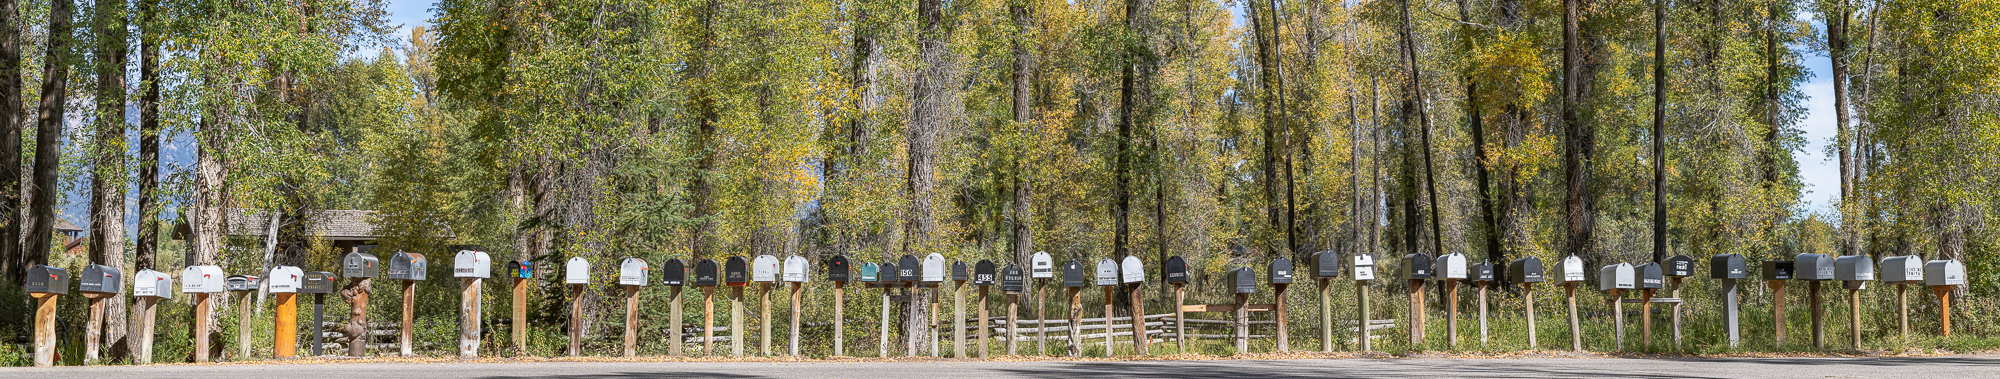 The mailboxes are cheap, but the houses sure aren’t